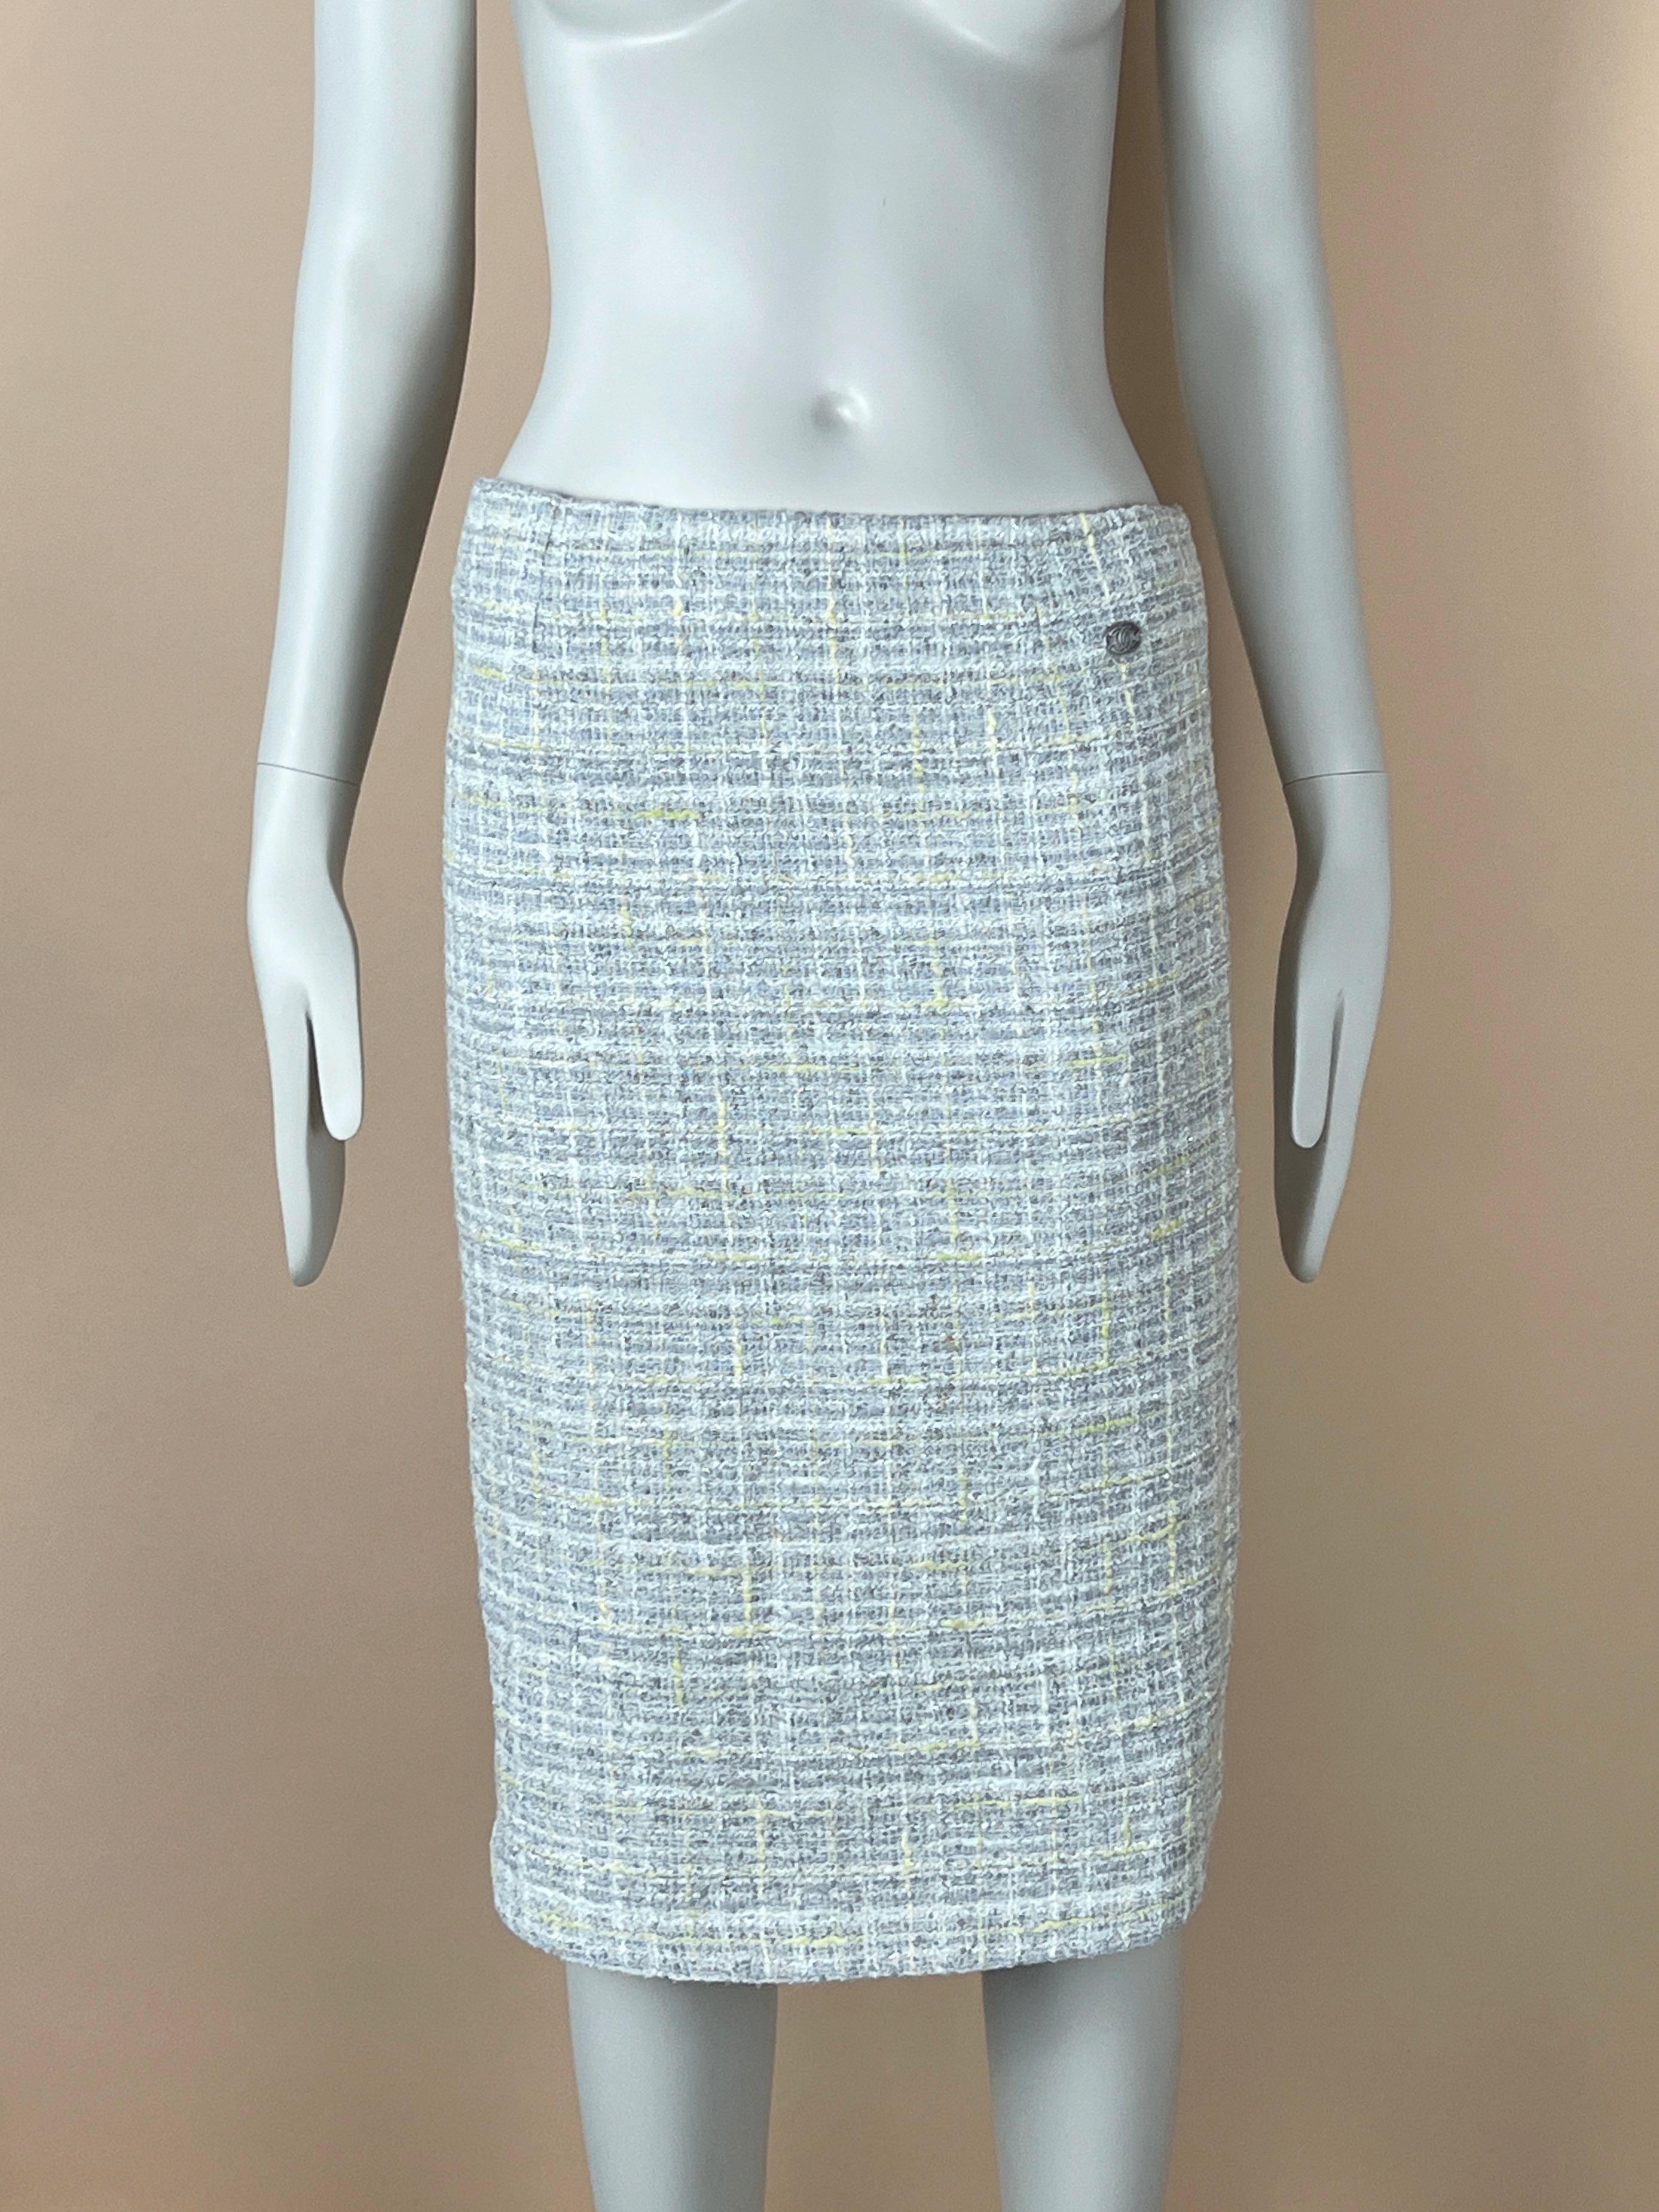 New Chanel lesage tweed high-waisted skirt from Paris / London collection.
So beautiful pastel colours (bluish gray, green, Ecru)!
CC logo at waist, Full silk lining.
Size mark 40 fr.